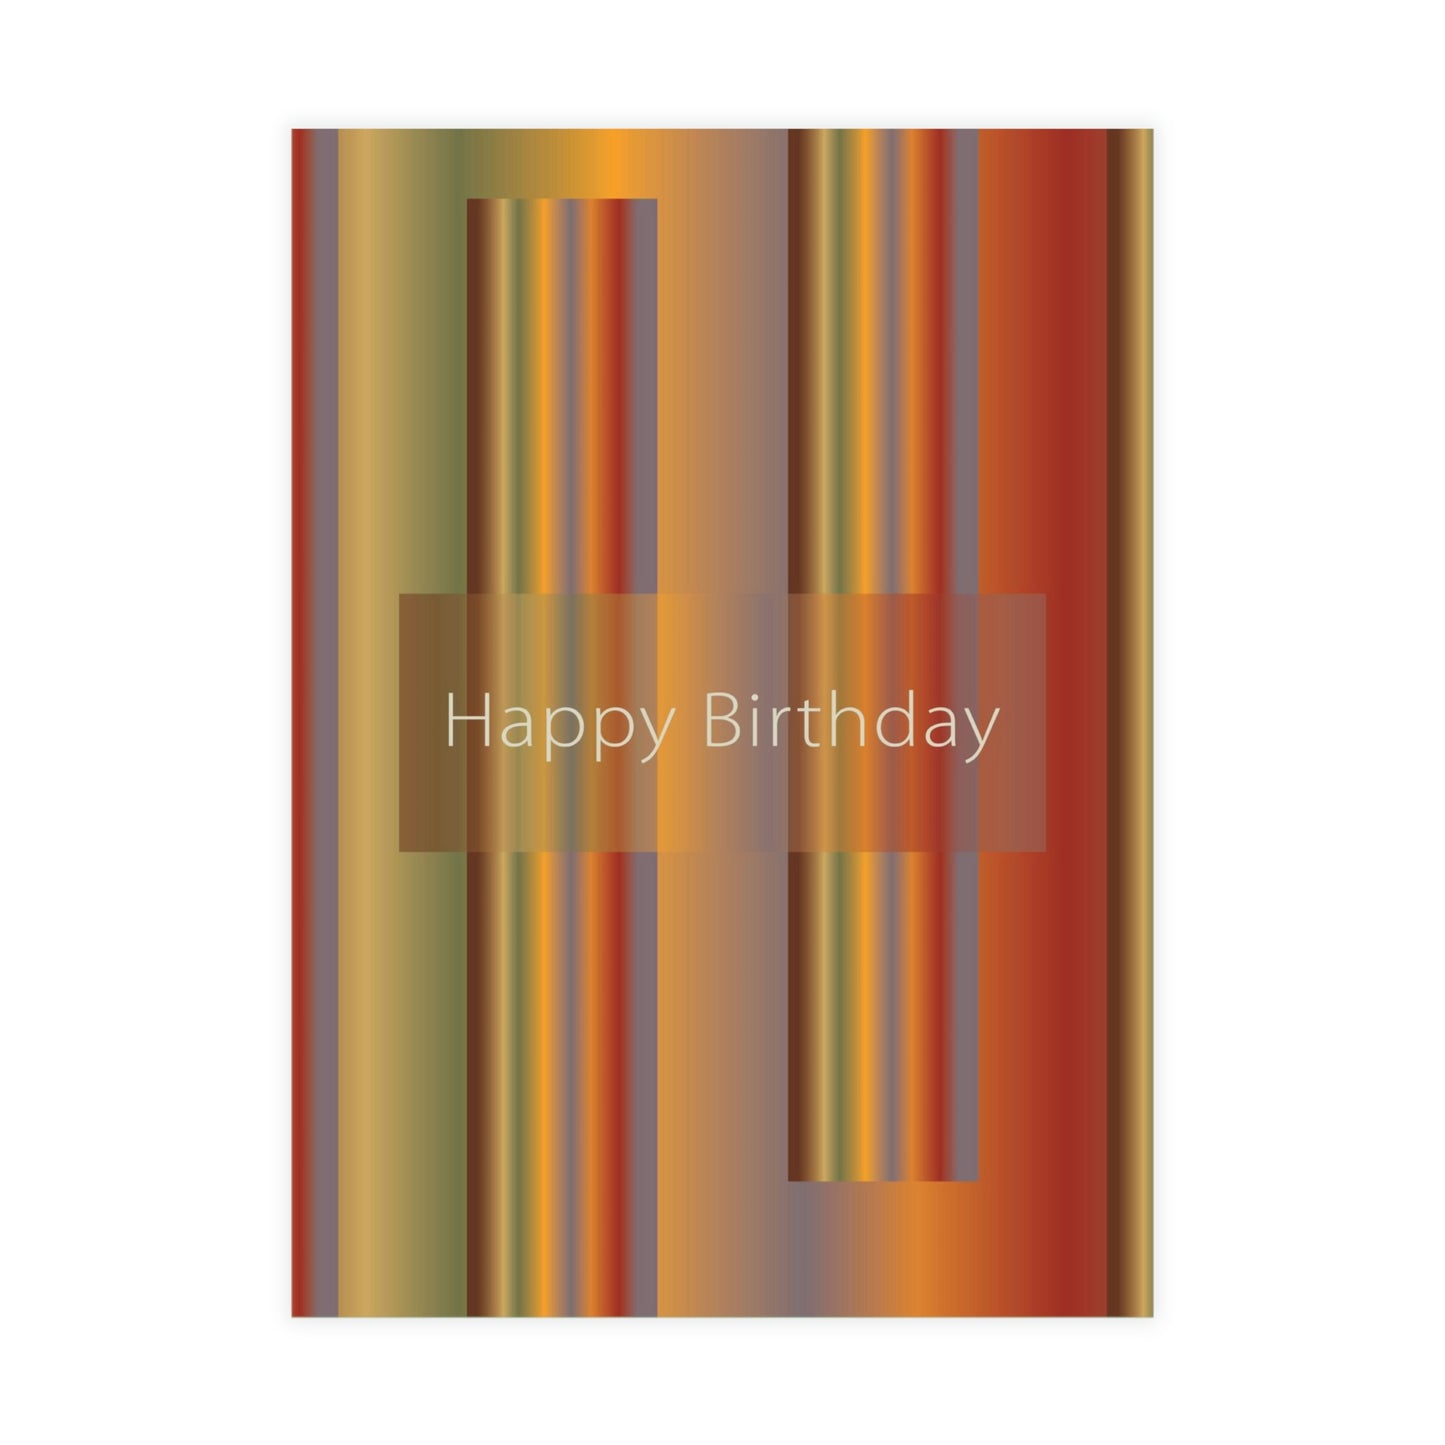 Unfolded Greeting Cards Vertical (10, 30, and 50pcs) Happy Birthday - Design No.1700